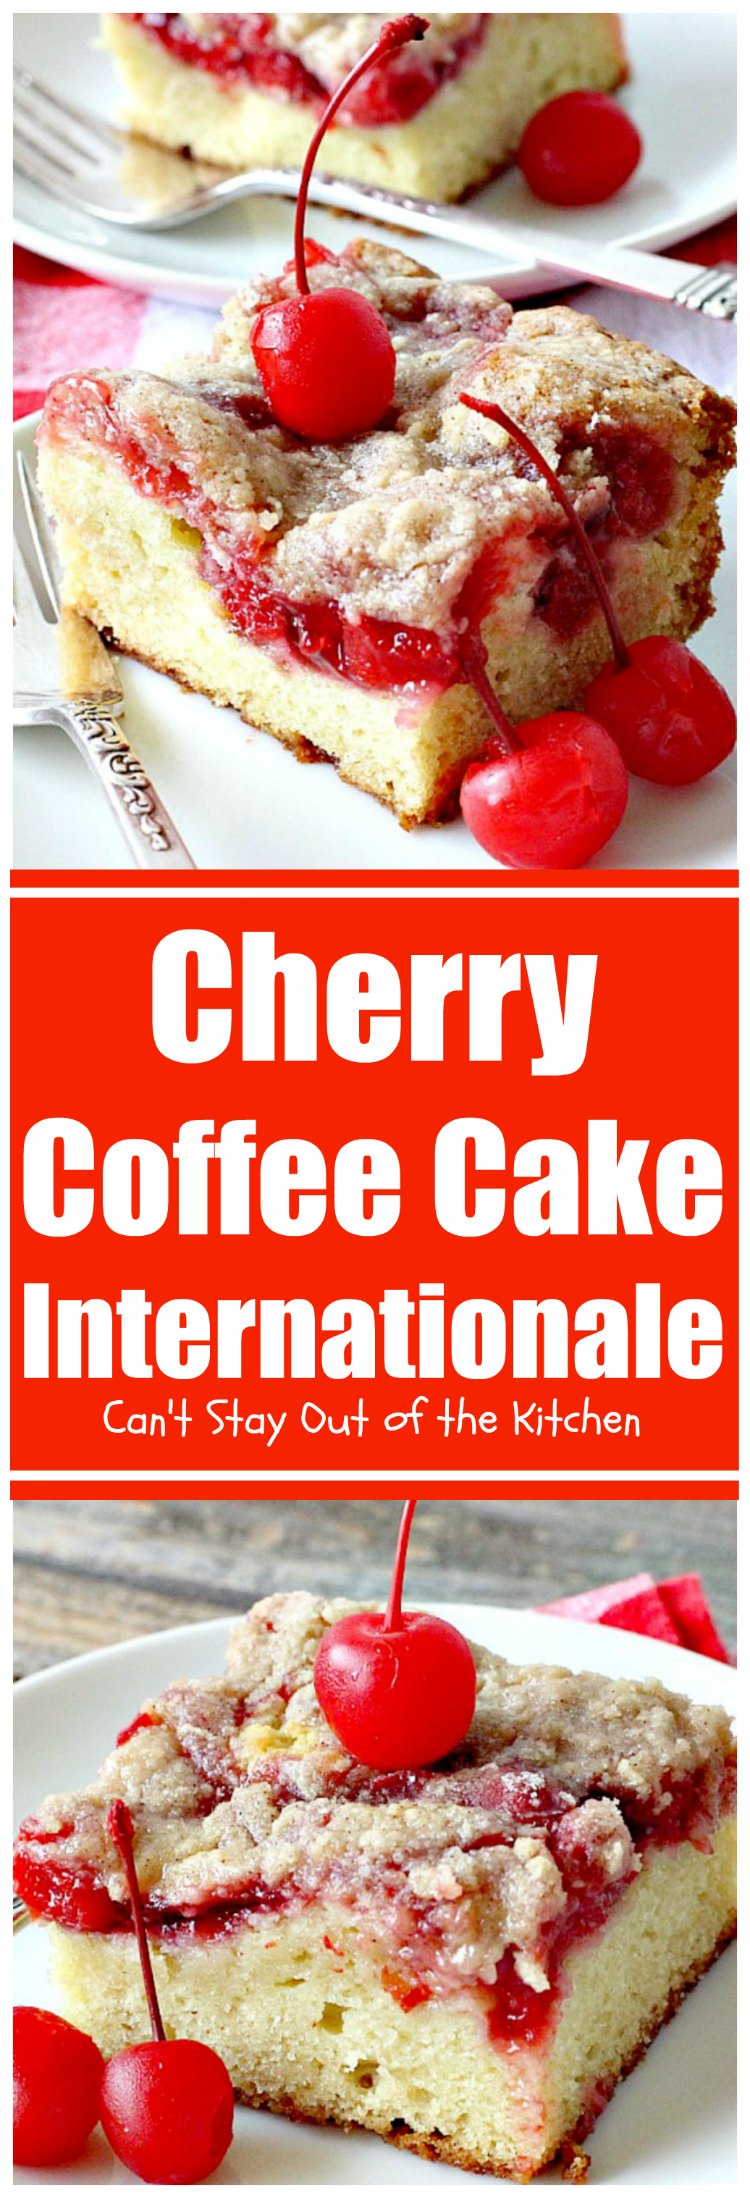 Cherry Coffee Cake Internationale | Can't Stay Out of the Kitchen